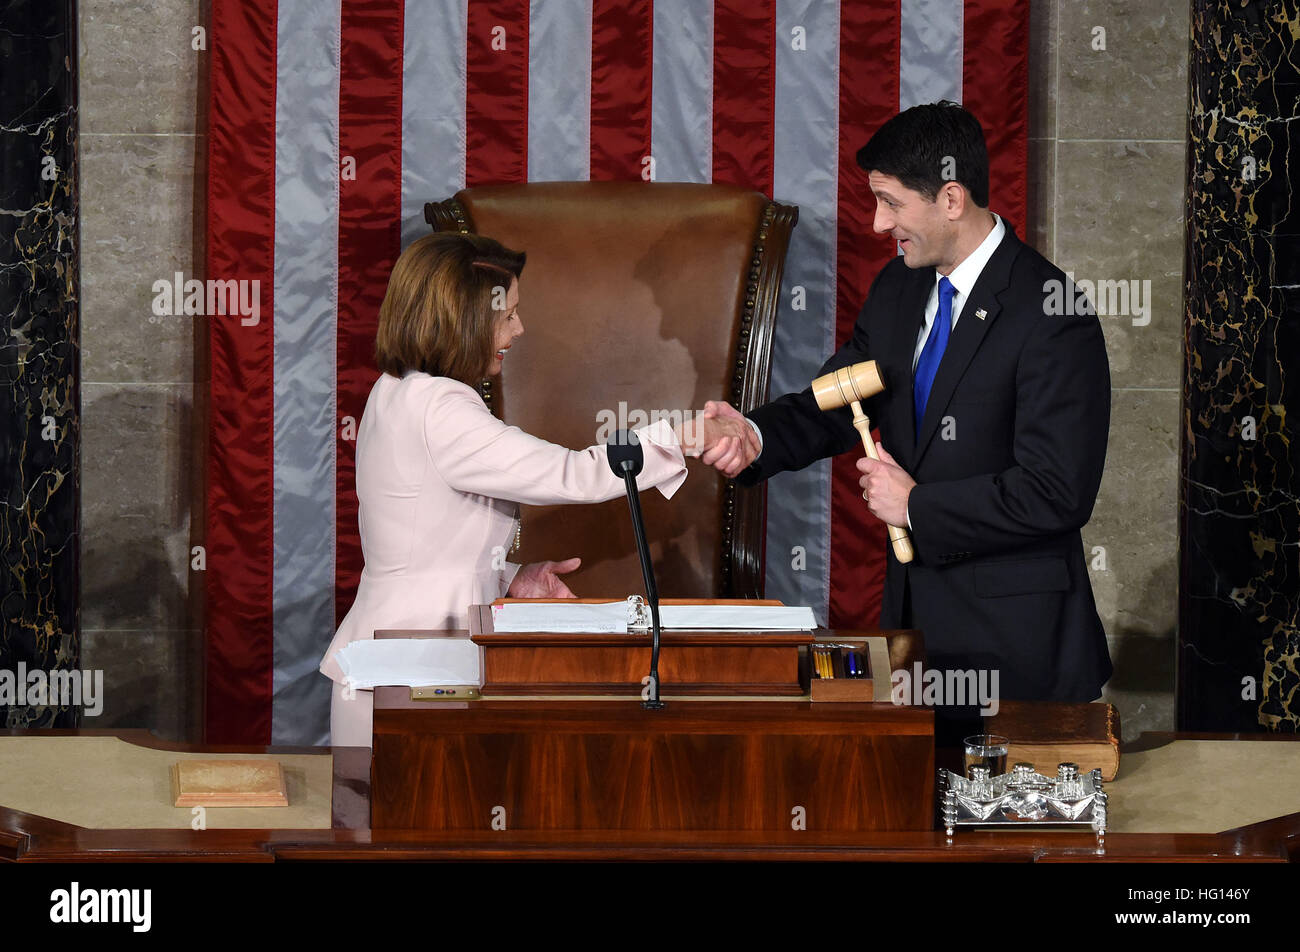 Washington, USA. 3rd Jan, 2017. Paul Ryan (R) receives the gavel from House Minority Leader Nancy Pelosi after being re-elected as House Speaker during the opening of the 115th U.S. Congress on Capitol Hill in Washington, DC, the United States, on Jan. 3, 2017. The 115th U.S. Congress convenes on Tuesday with Republican Paul Ryan re-elected as House Speaker as expected while outgoing Vice President Joe Biden presides over the old Senate chamber for the last time. © Yin Bogu/Xinhua/Alamy Live News Stock Photo